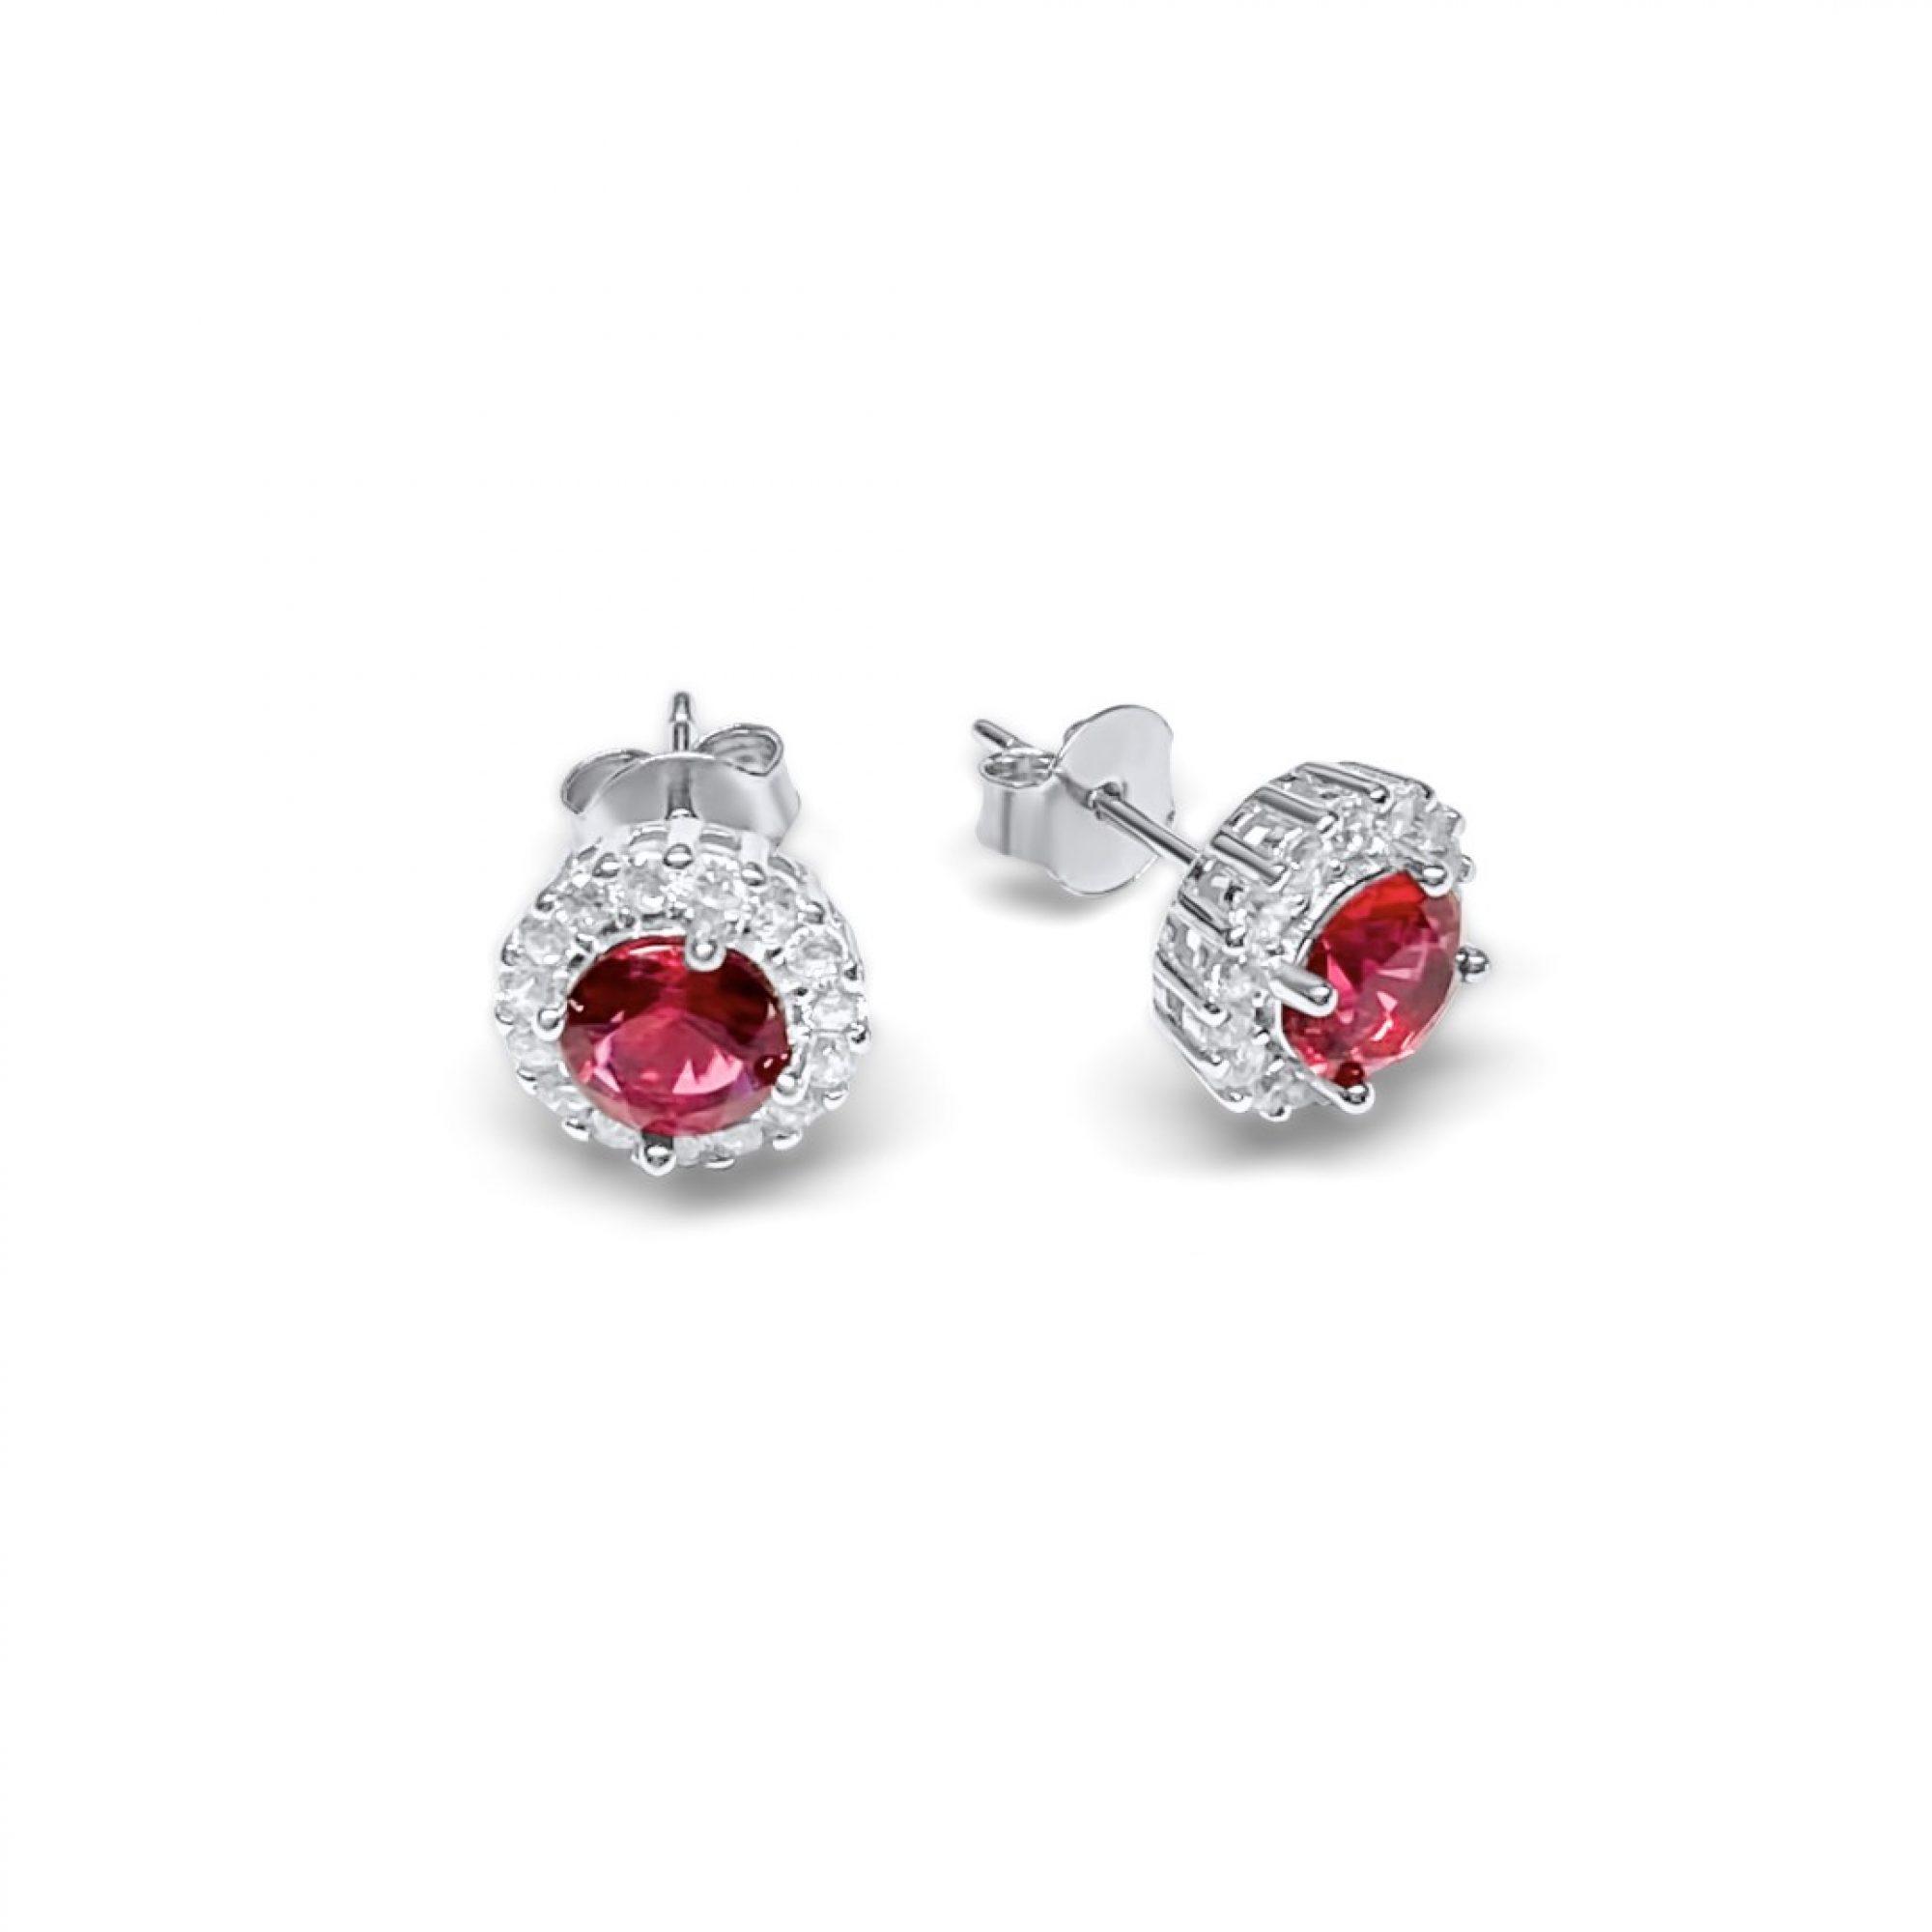 Silver stud earrings with ruby and zircon stones